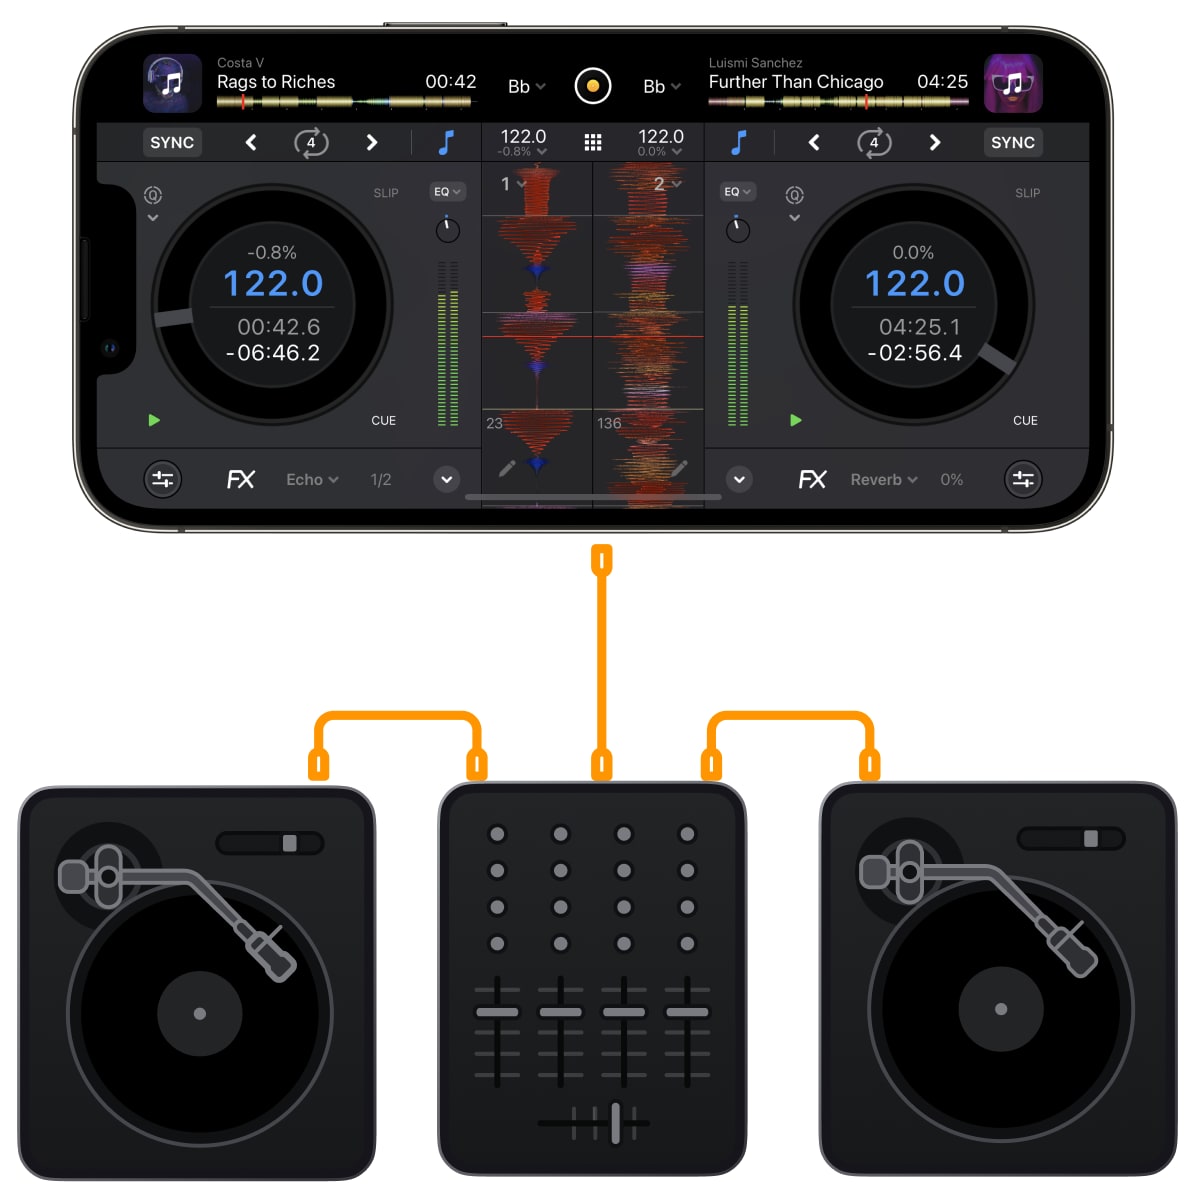 Promotional image showcasing the digital vinyl system in Algoriddim's djay Pro for iPhone, iPad and Mac which allows you to fully control the app via dedicated DJ hardware, such as professional turntables and mixers 